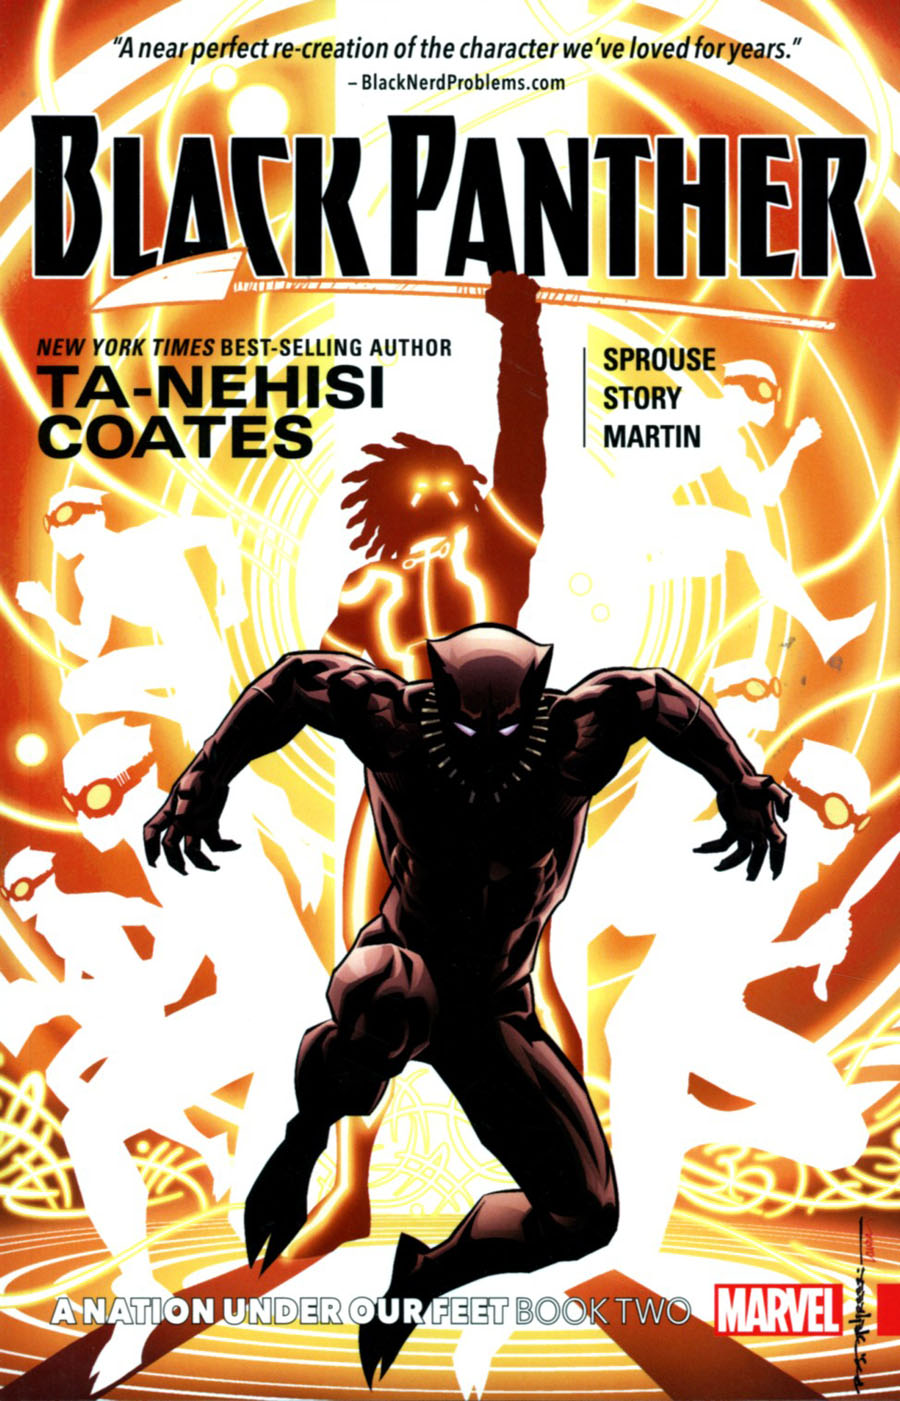 Black Panther A Nation Under Our Feet Vol 2 TP